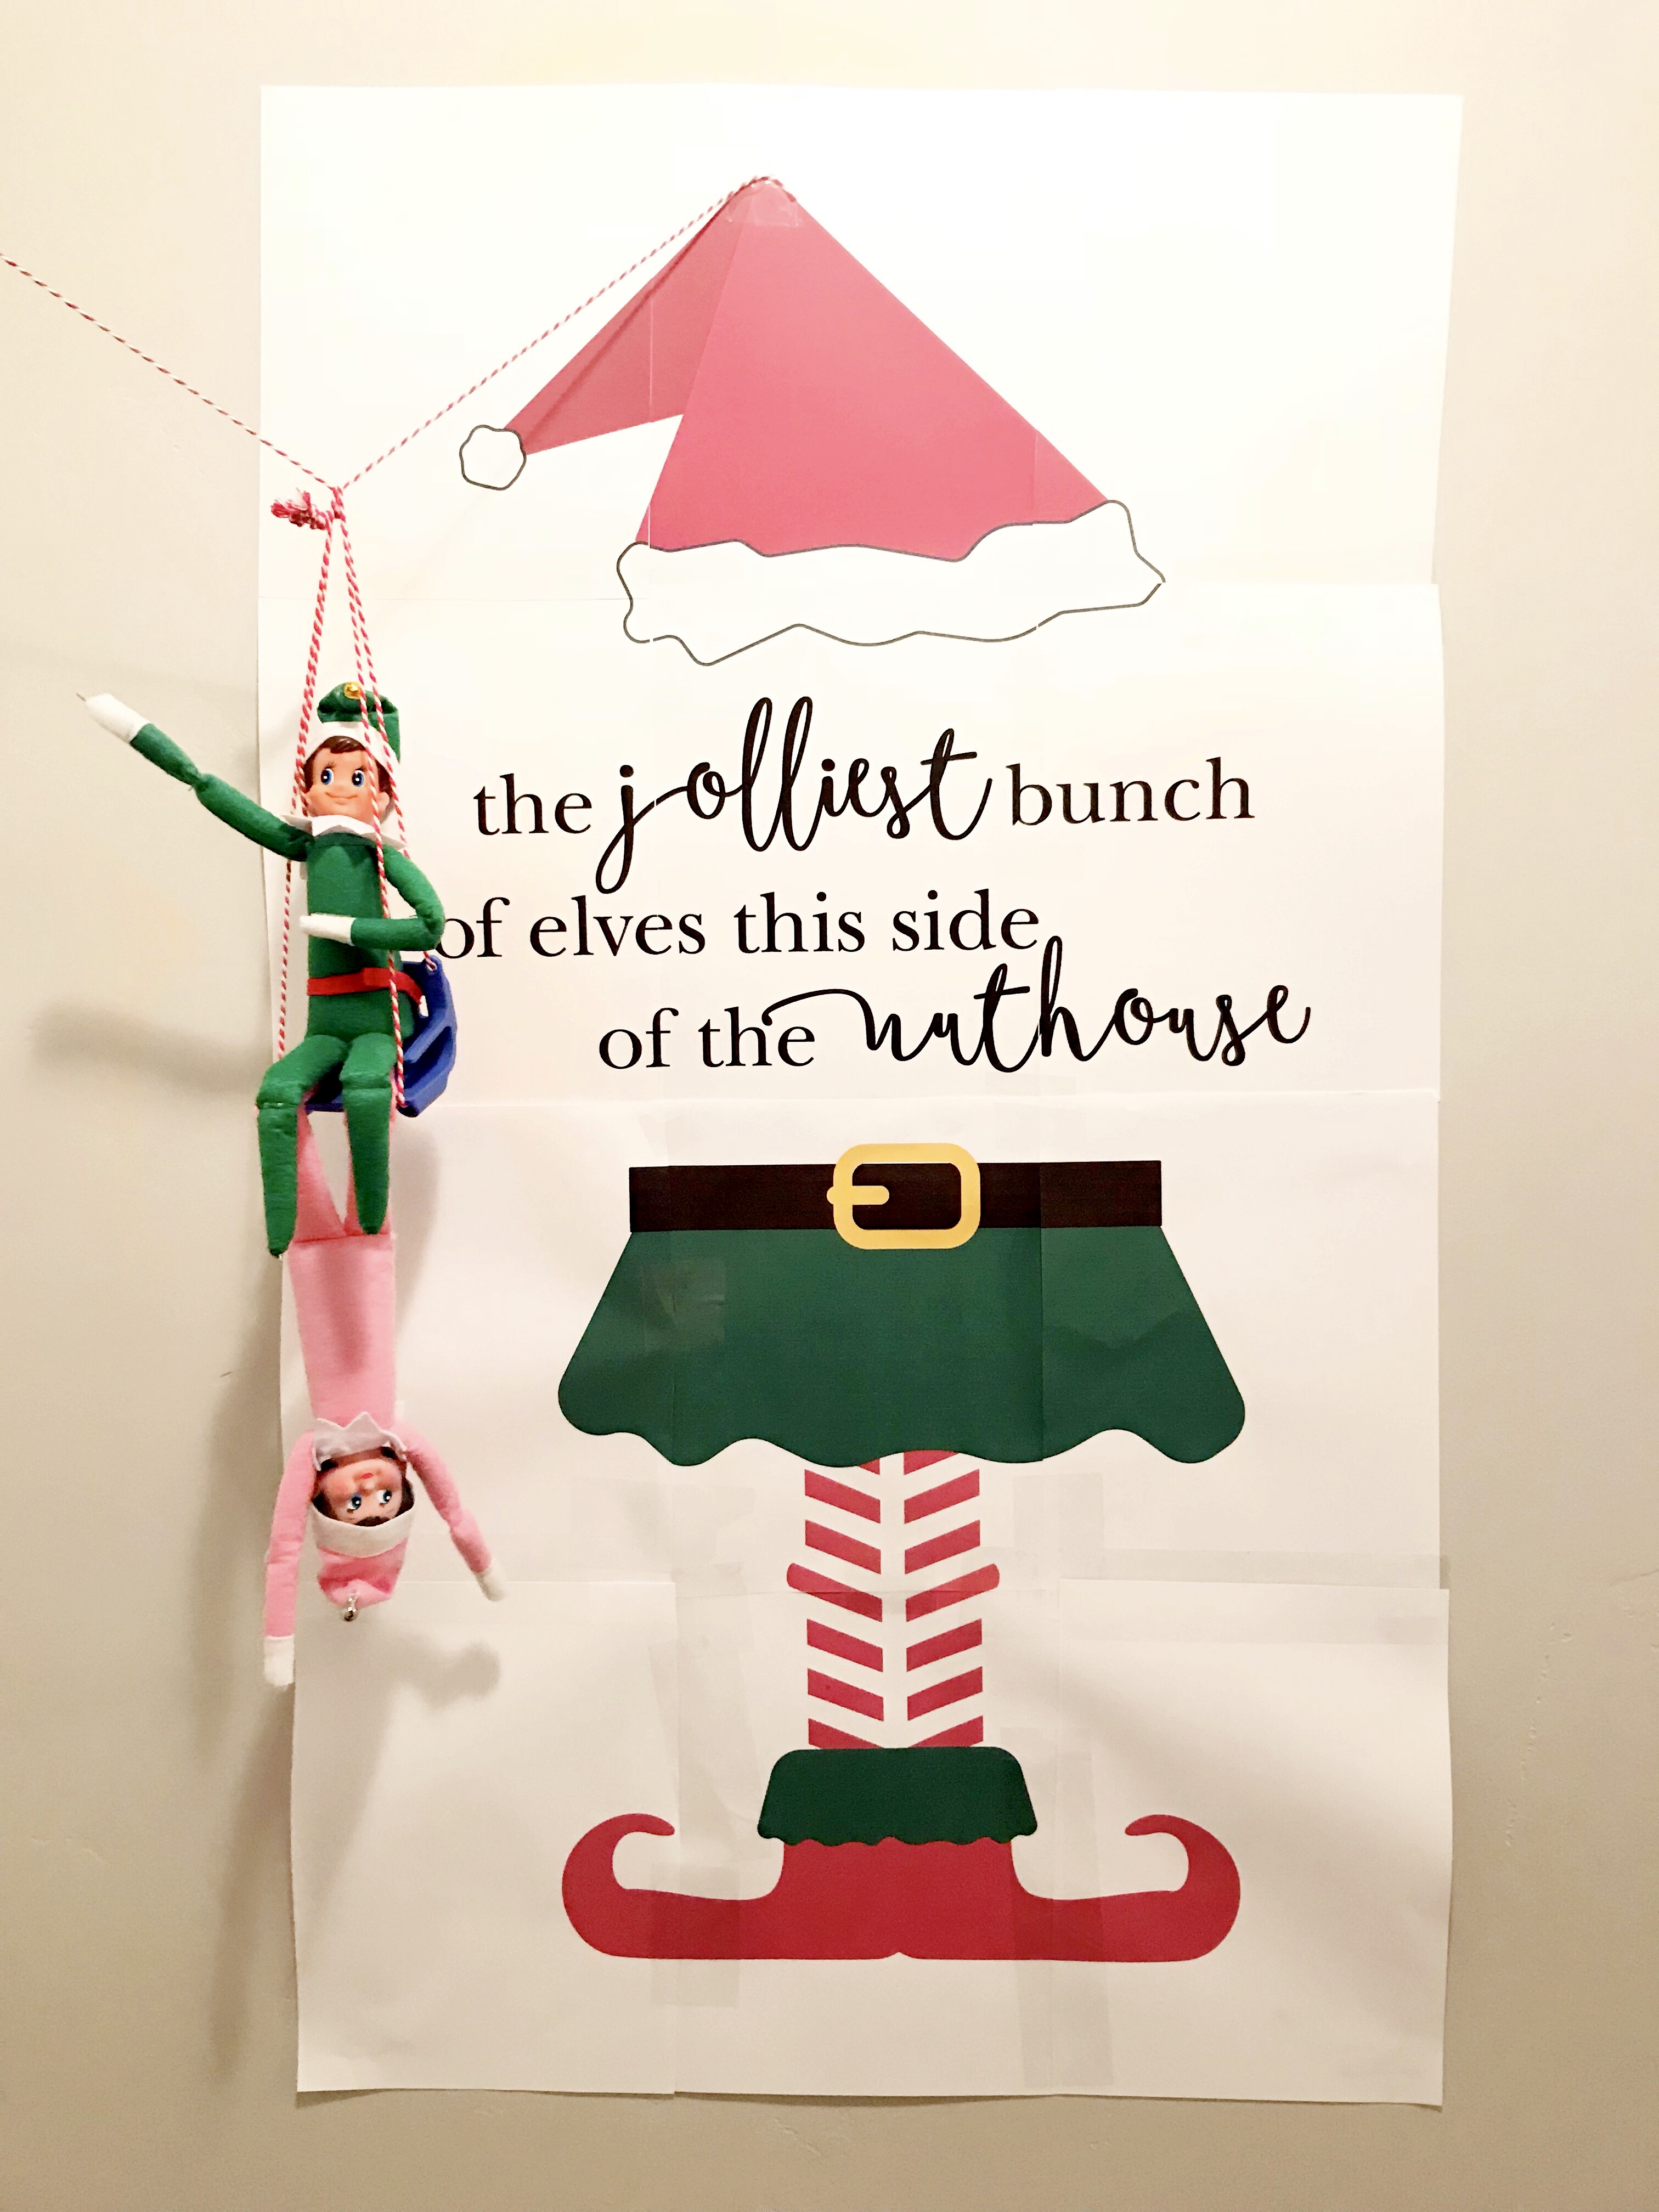 official-elf-on-the-shelf-rules-free-printable